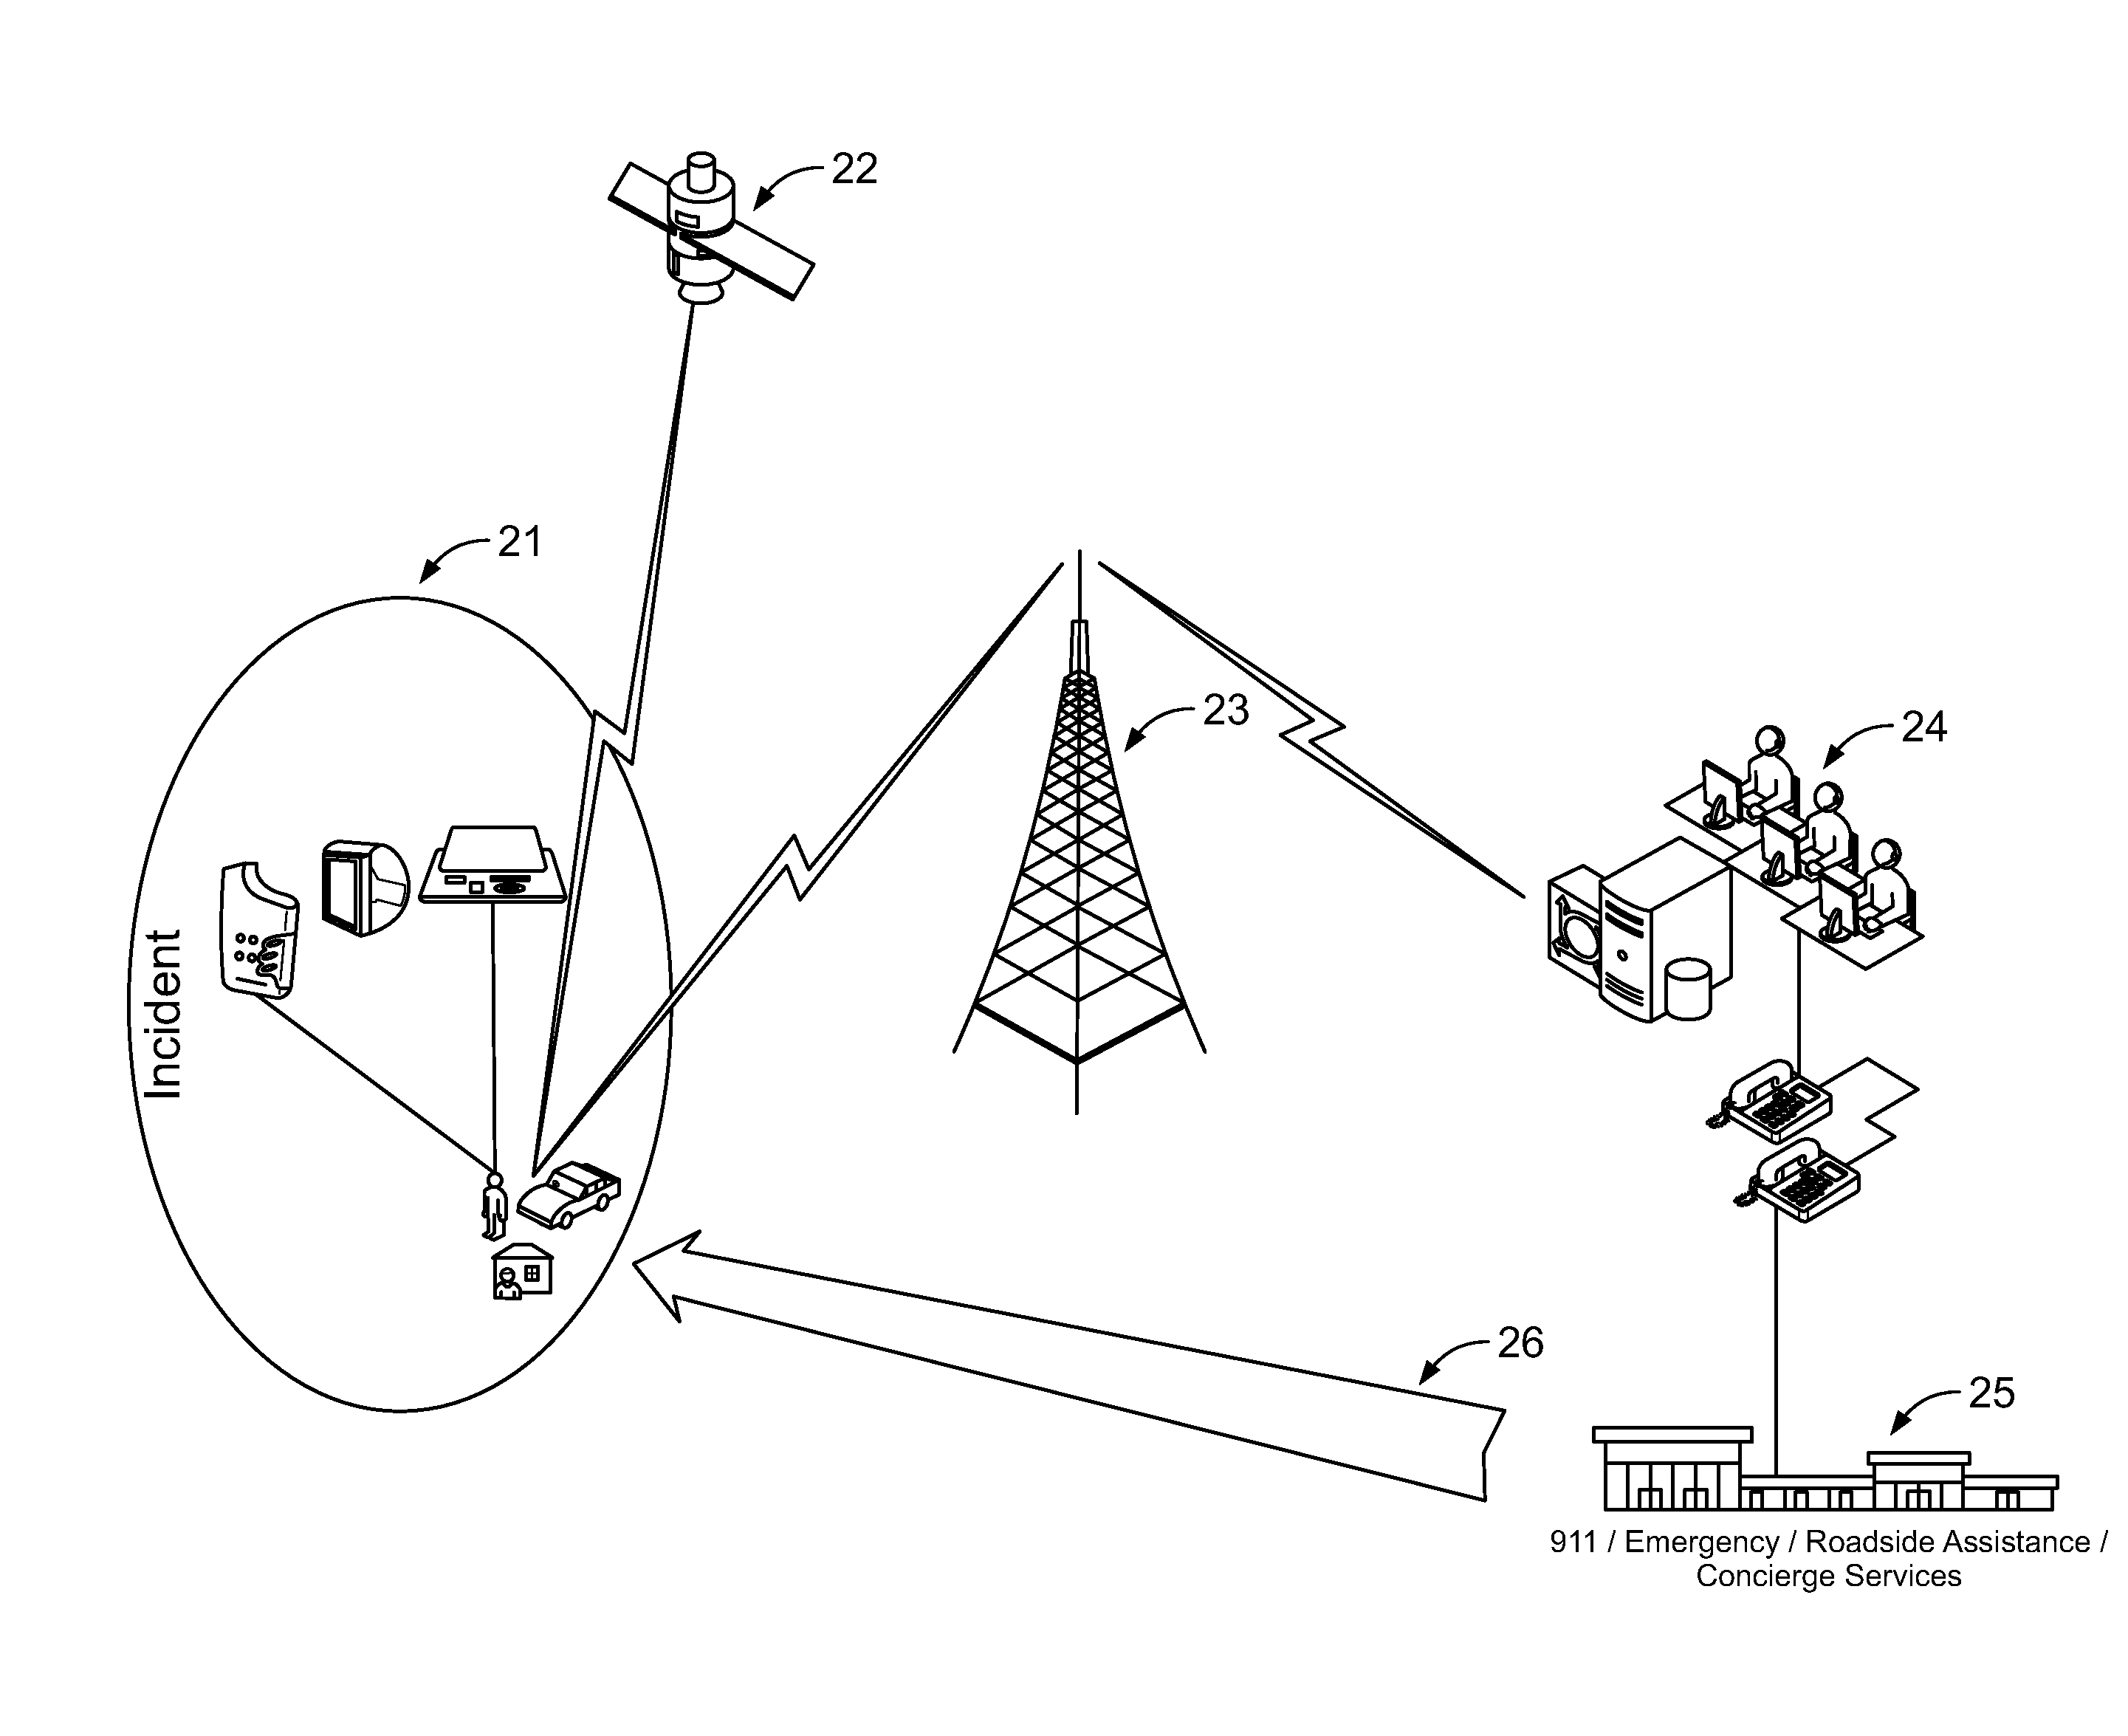 Apparatus and method for generating alerts